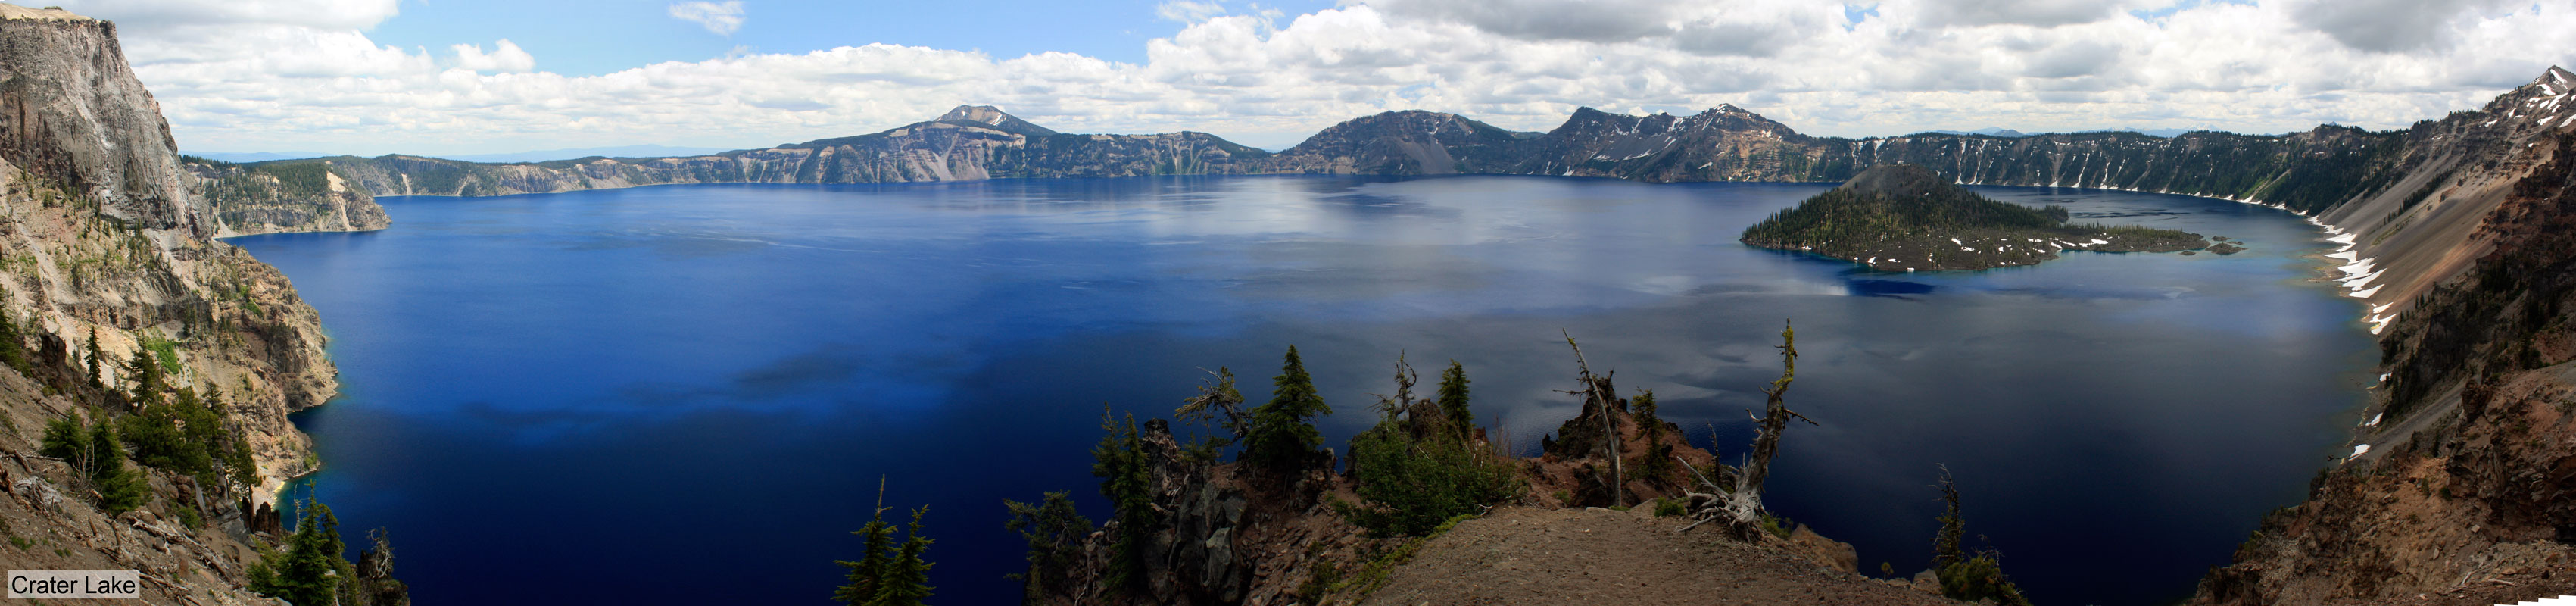 North Junction Overlook Crater Lake